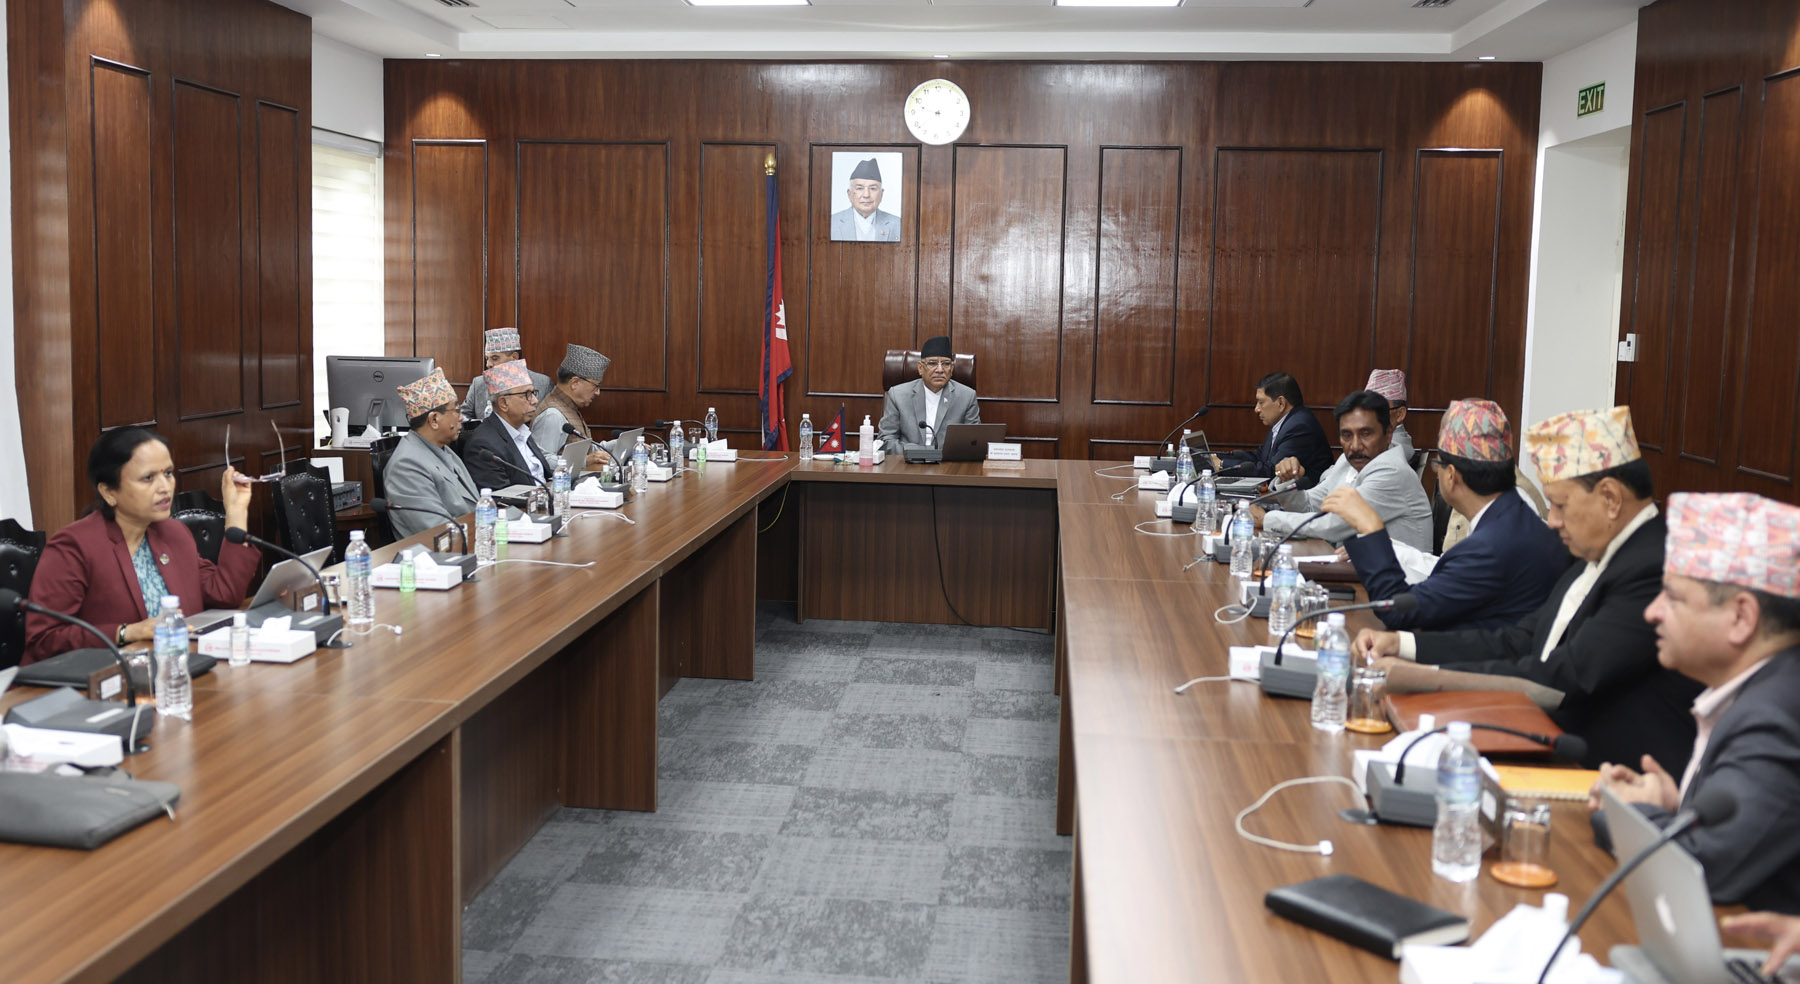 Cabinet Meeting: PM Dahal’s participation in 78th UNGA approved